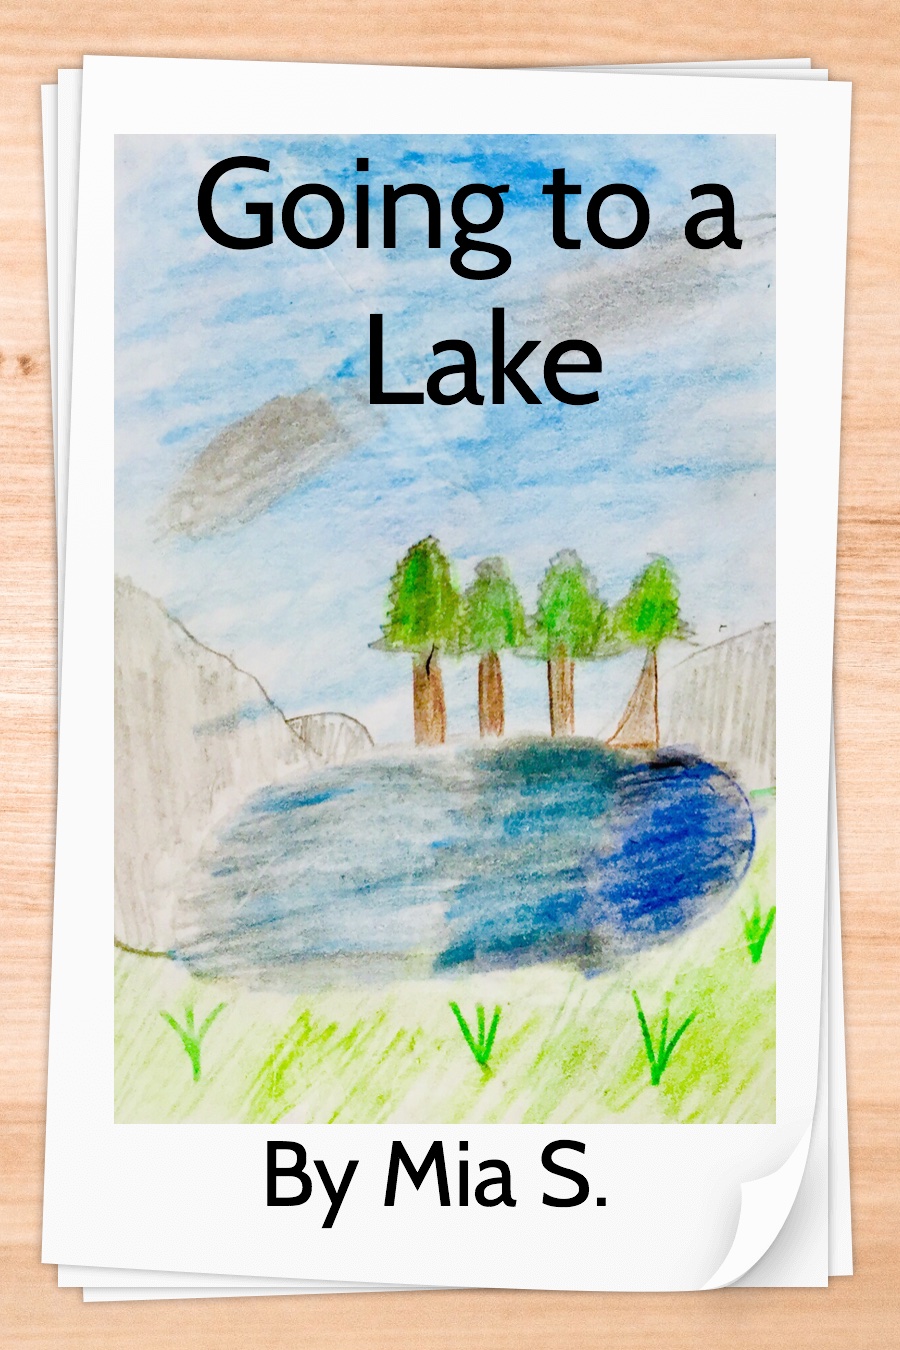 Going to a Lake by Mia S